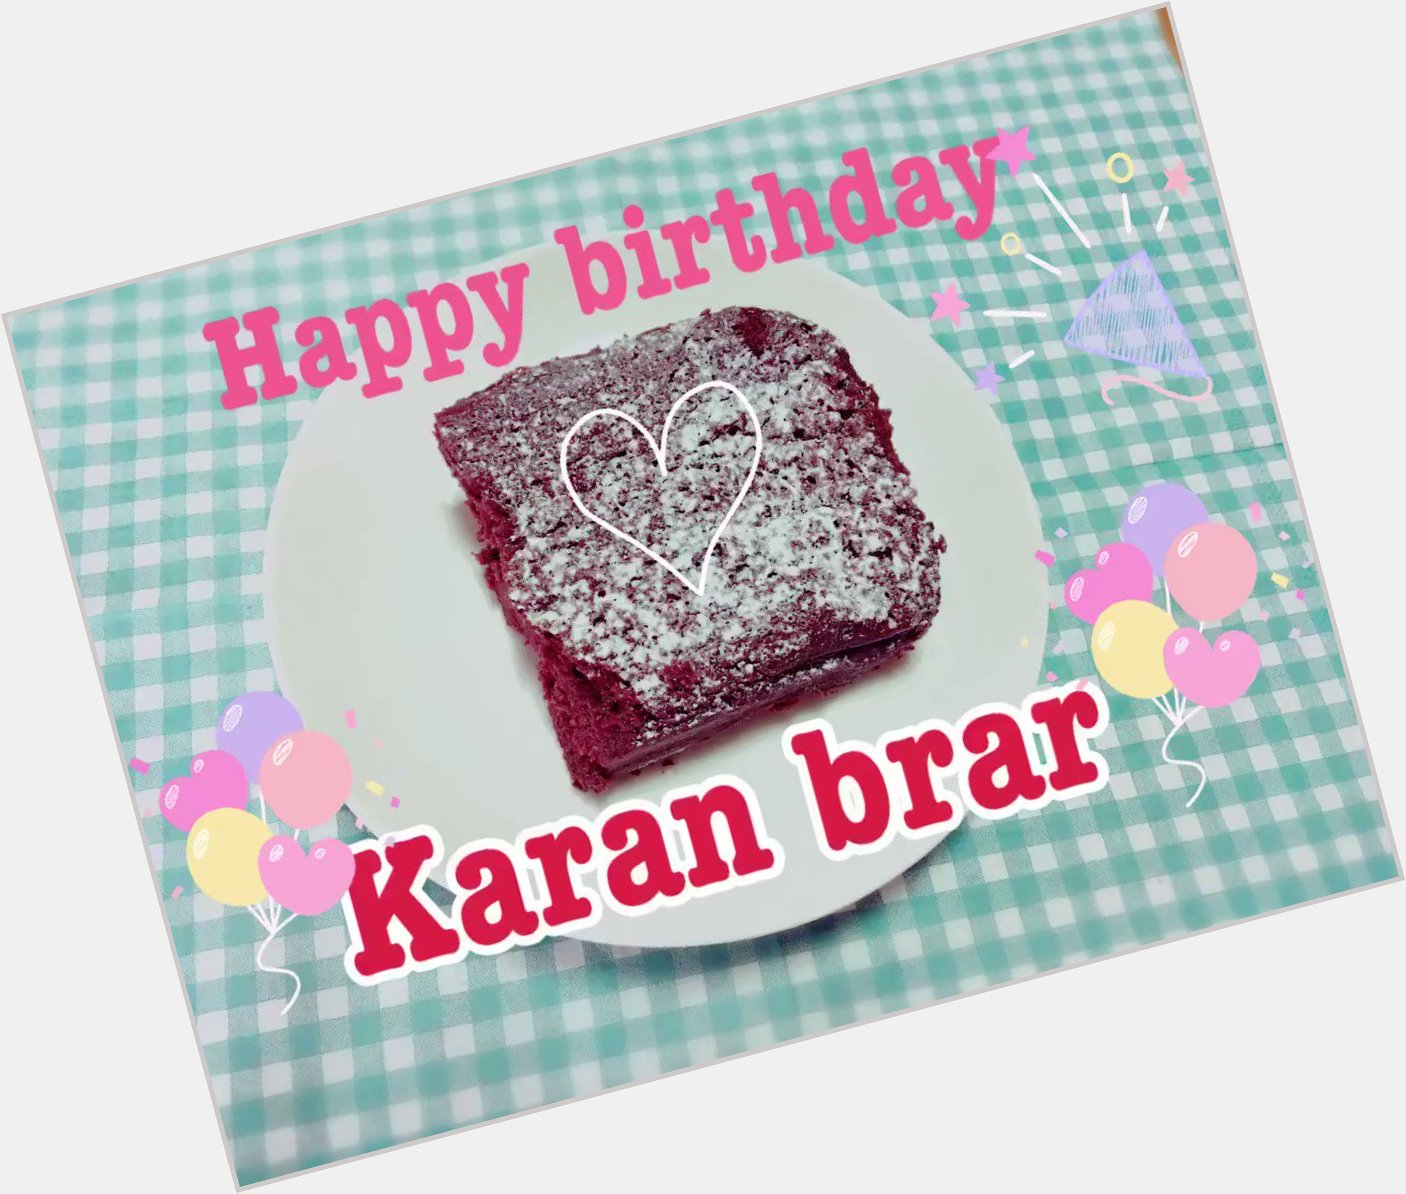 Happy birthday Karan Brar I hope today is good day for you. 